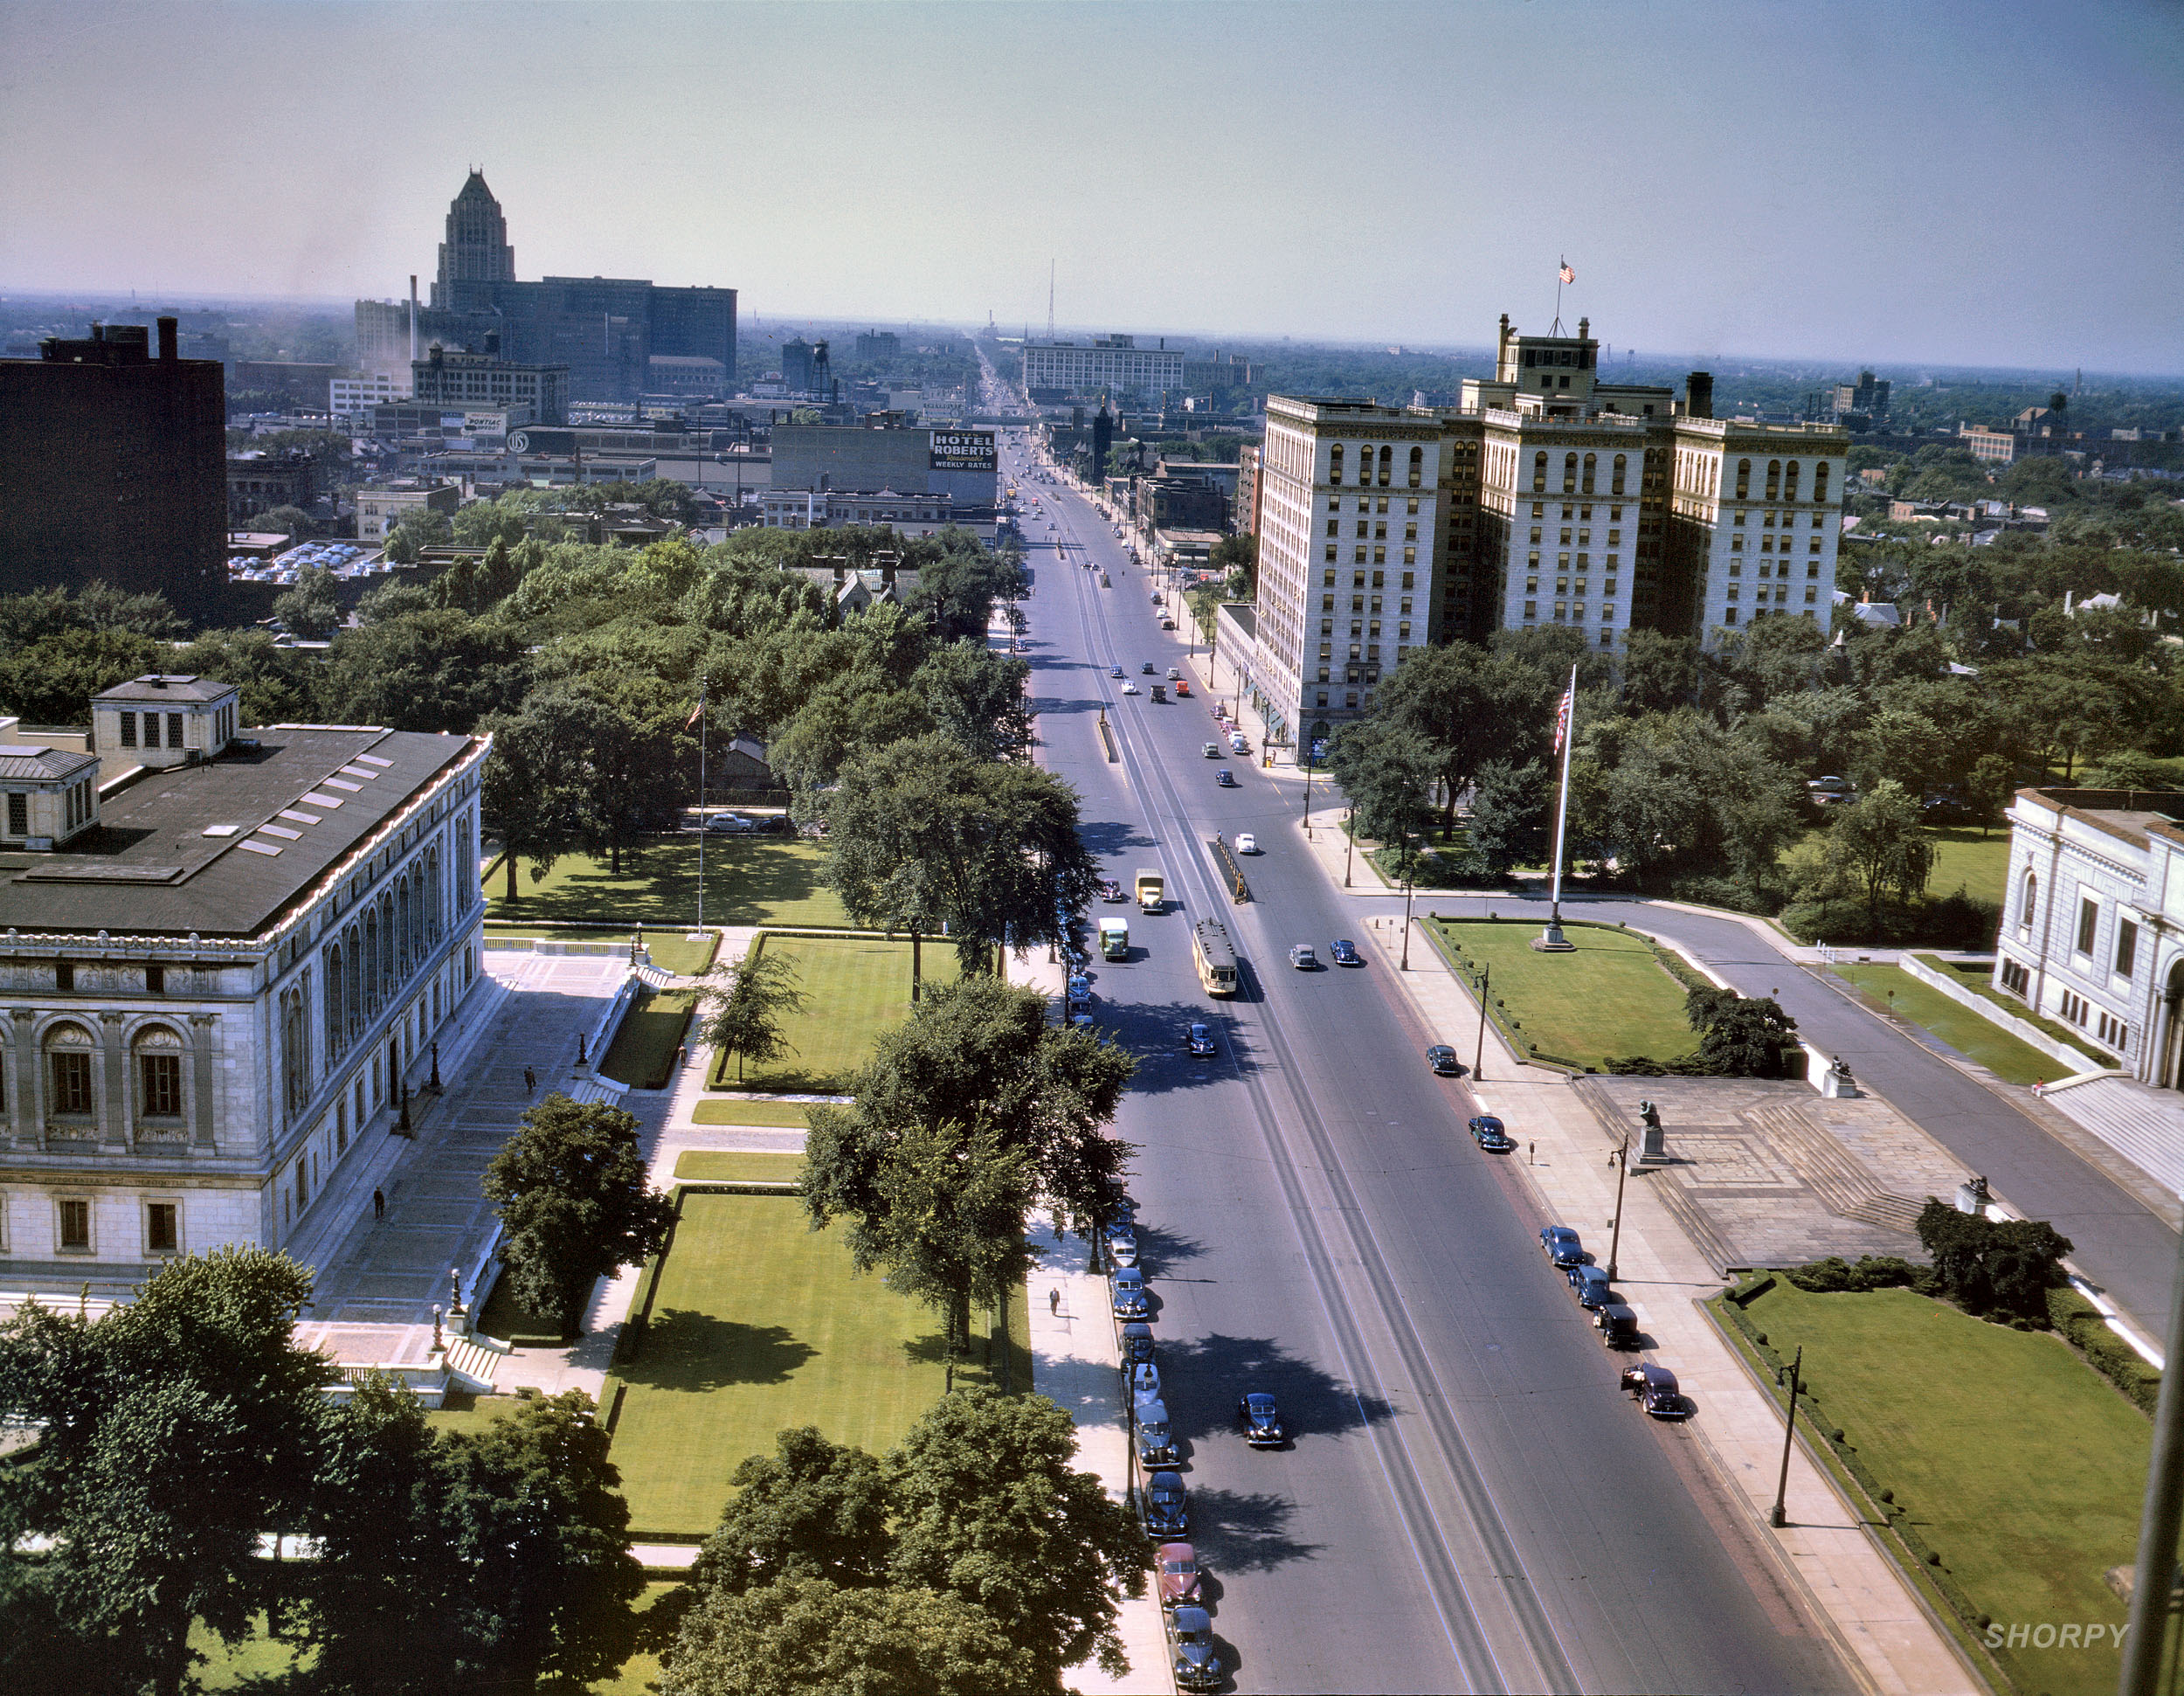 Detroit, July 1942. "Looking north on Woodward Avenue from the Maccabees Building with the Fisher Building at the distant left, and the Wardell Hotel at the right." 4x5 Kodachrome transparency by Arthur Siegel. View full size.